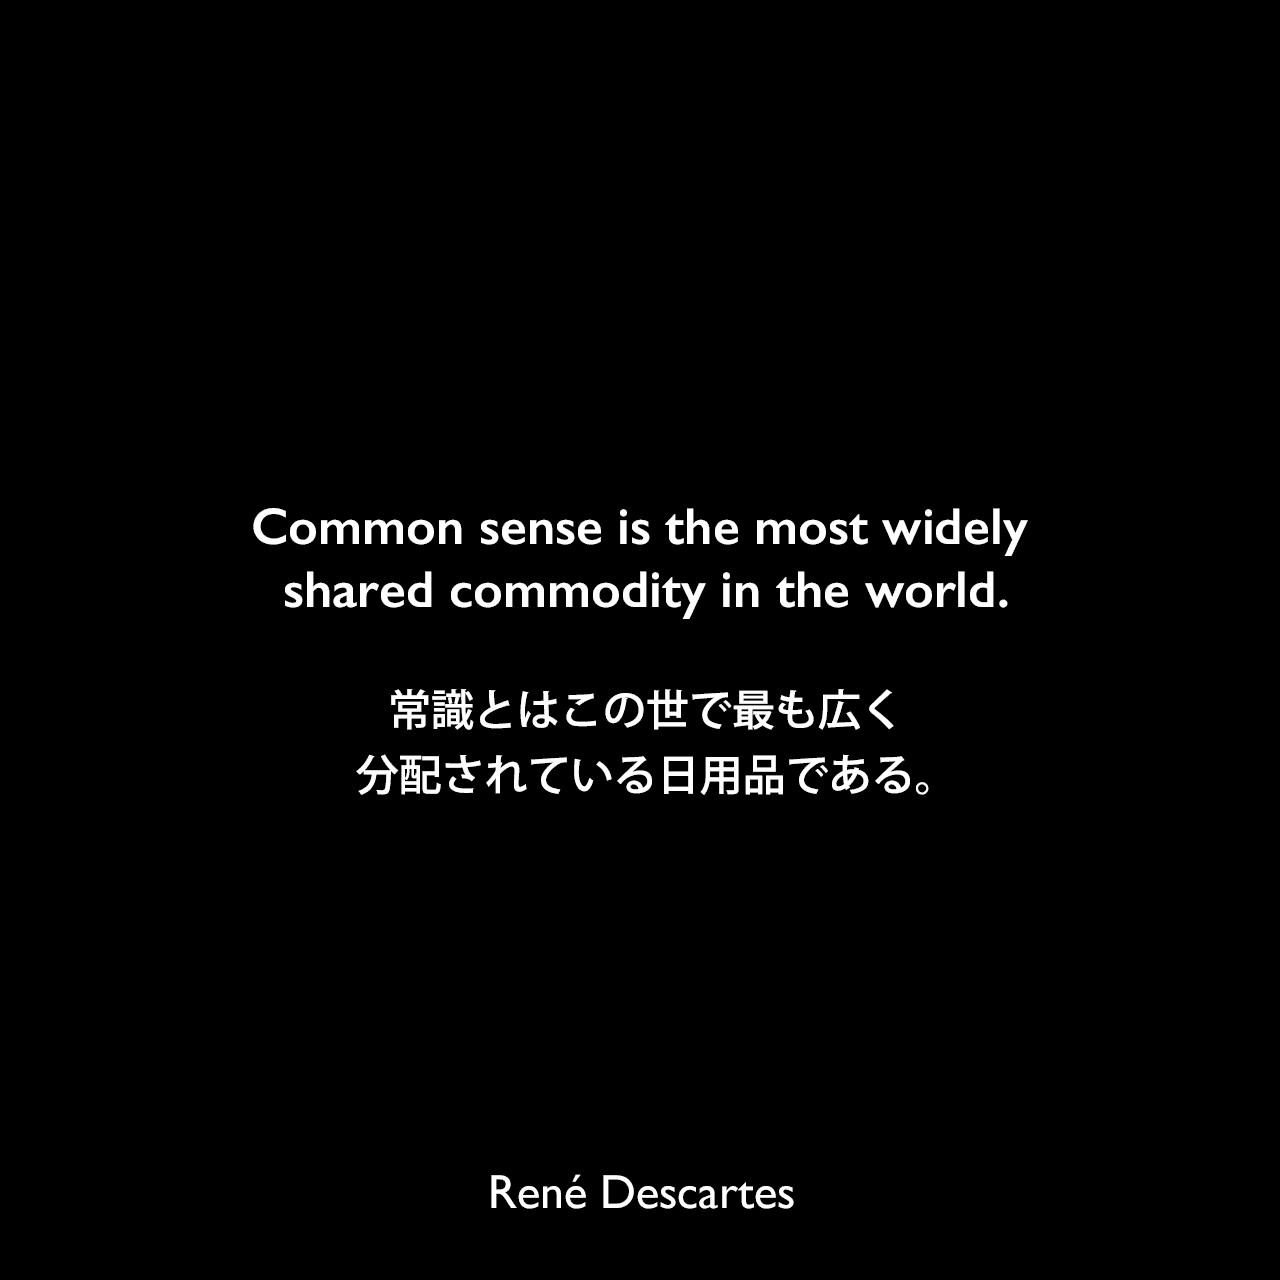 Common sense is the most widely shared commodity in the world.常識とはこの世で最も広く分配されている日用品である。René Descartes